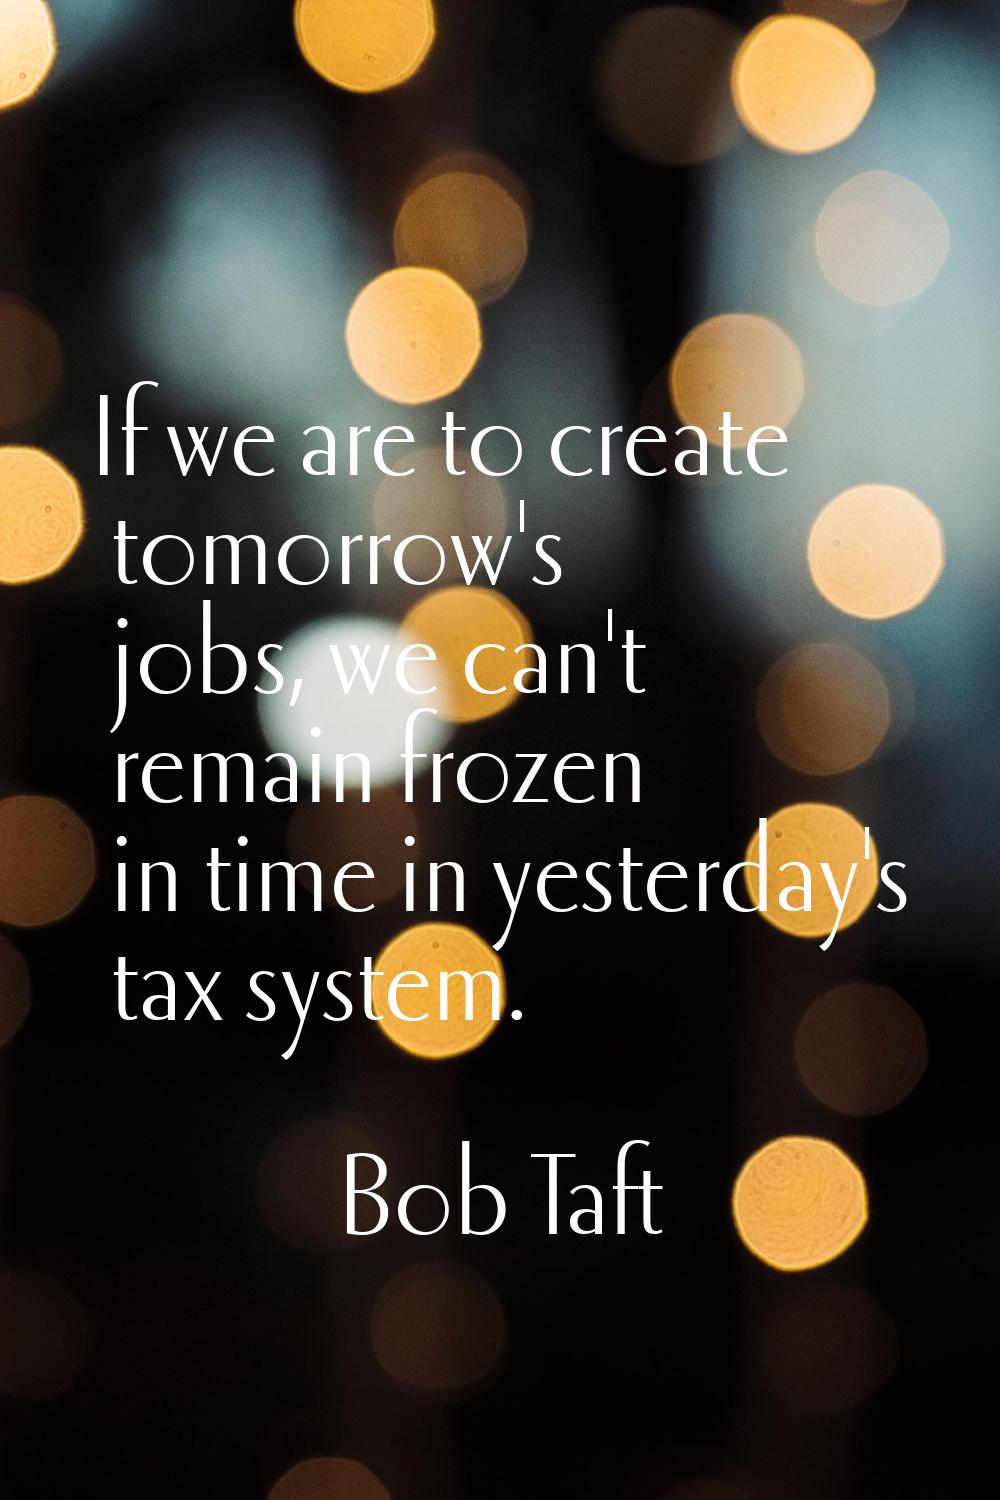 If we are to create tomorrow's jobs, we can't remain frozen in time in yesterday's tax system.